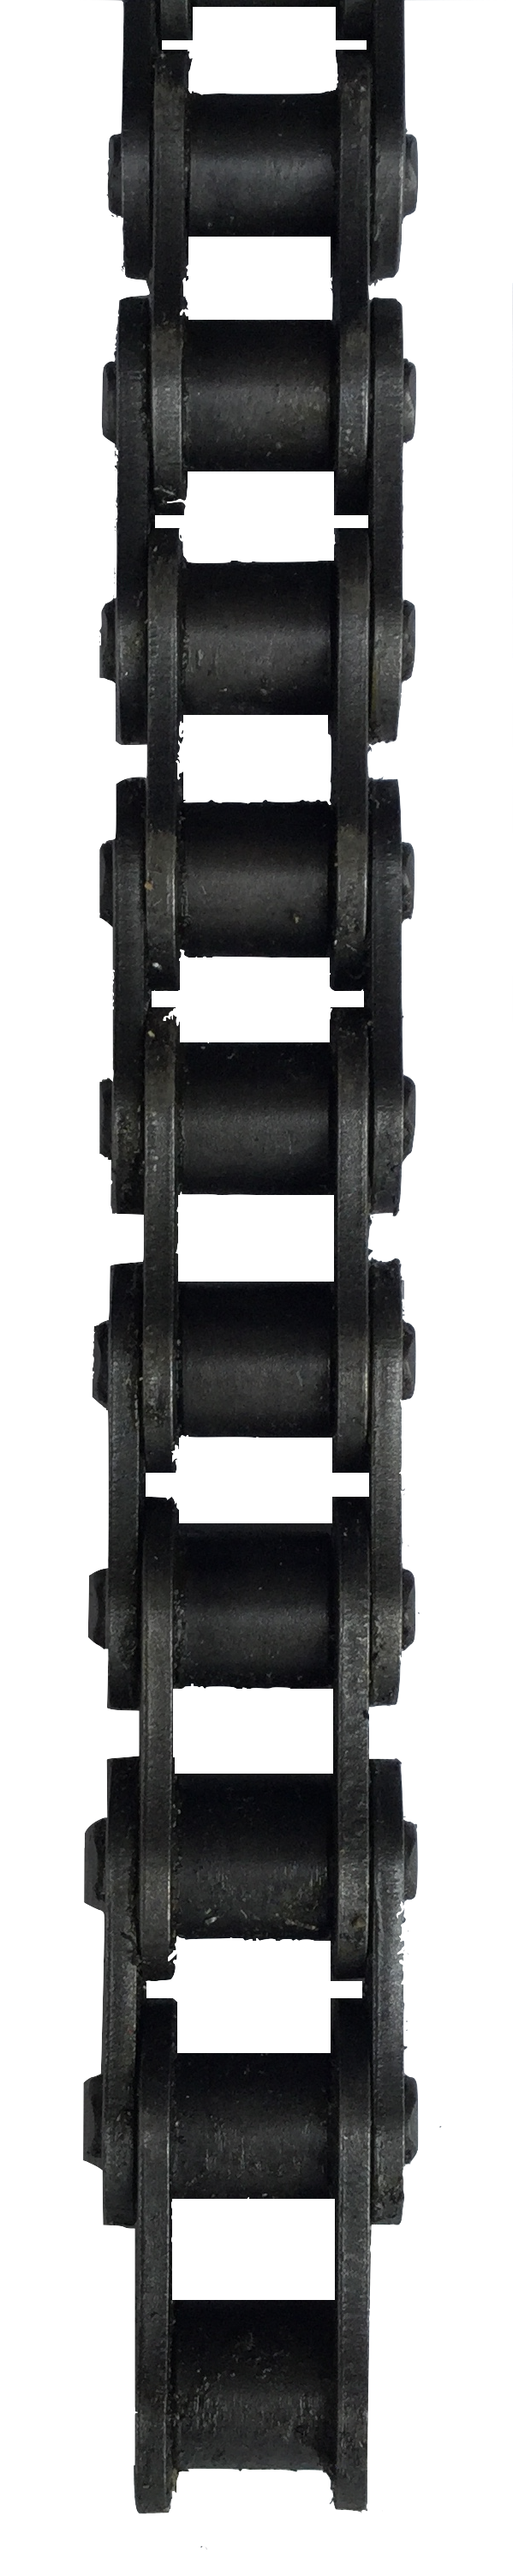 HKK #80 Standard Riveted Roller Chain (1.000" Pitch) - SOLD BY THE FOOT - Froedge Machine & Supply Co., Inc.